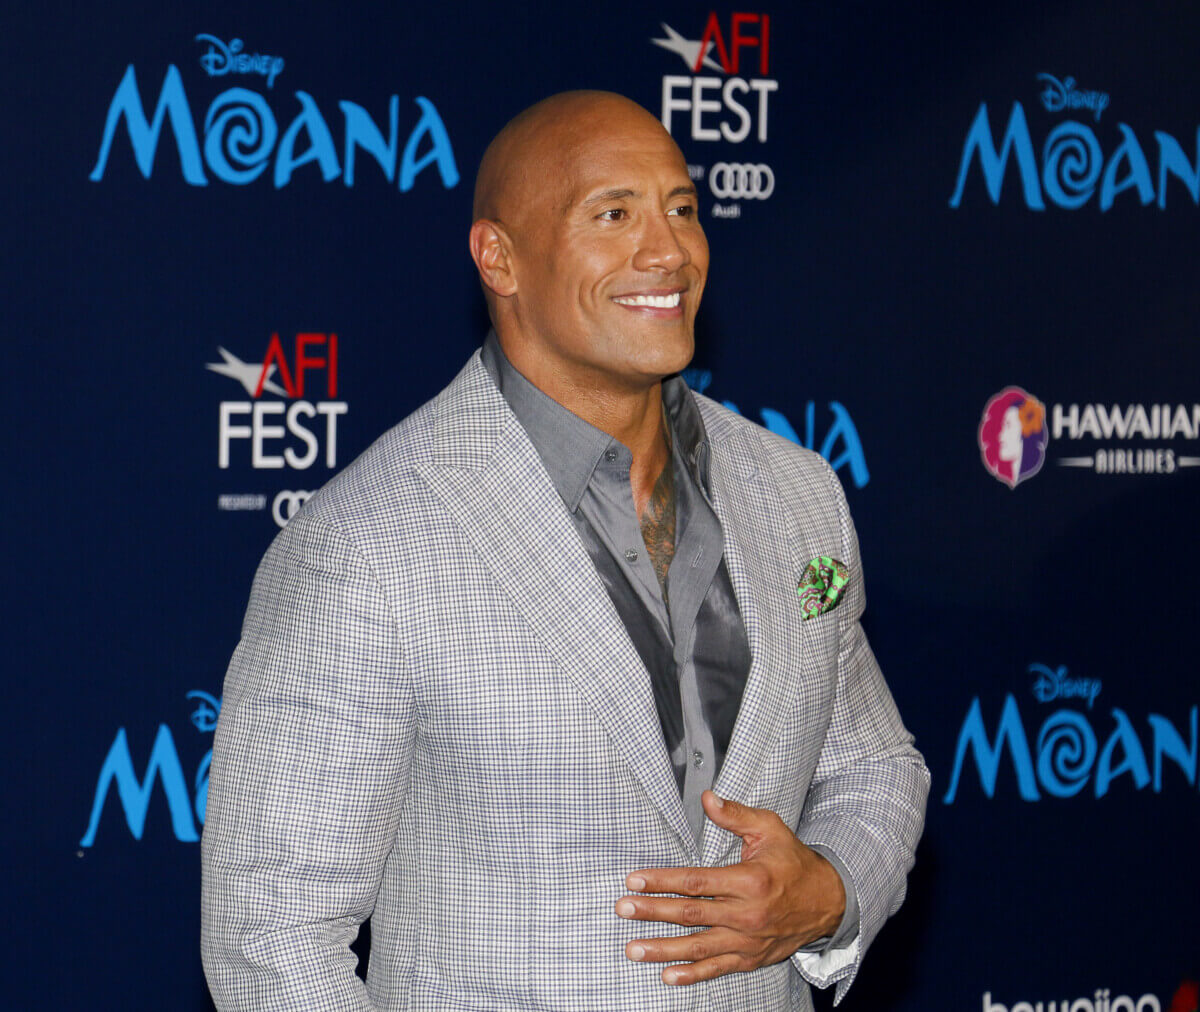 Dwayne Johnson at the AFI FEST 2016 Premiere of “Moana” in 2016